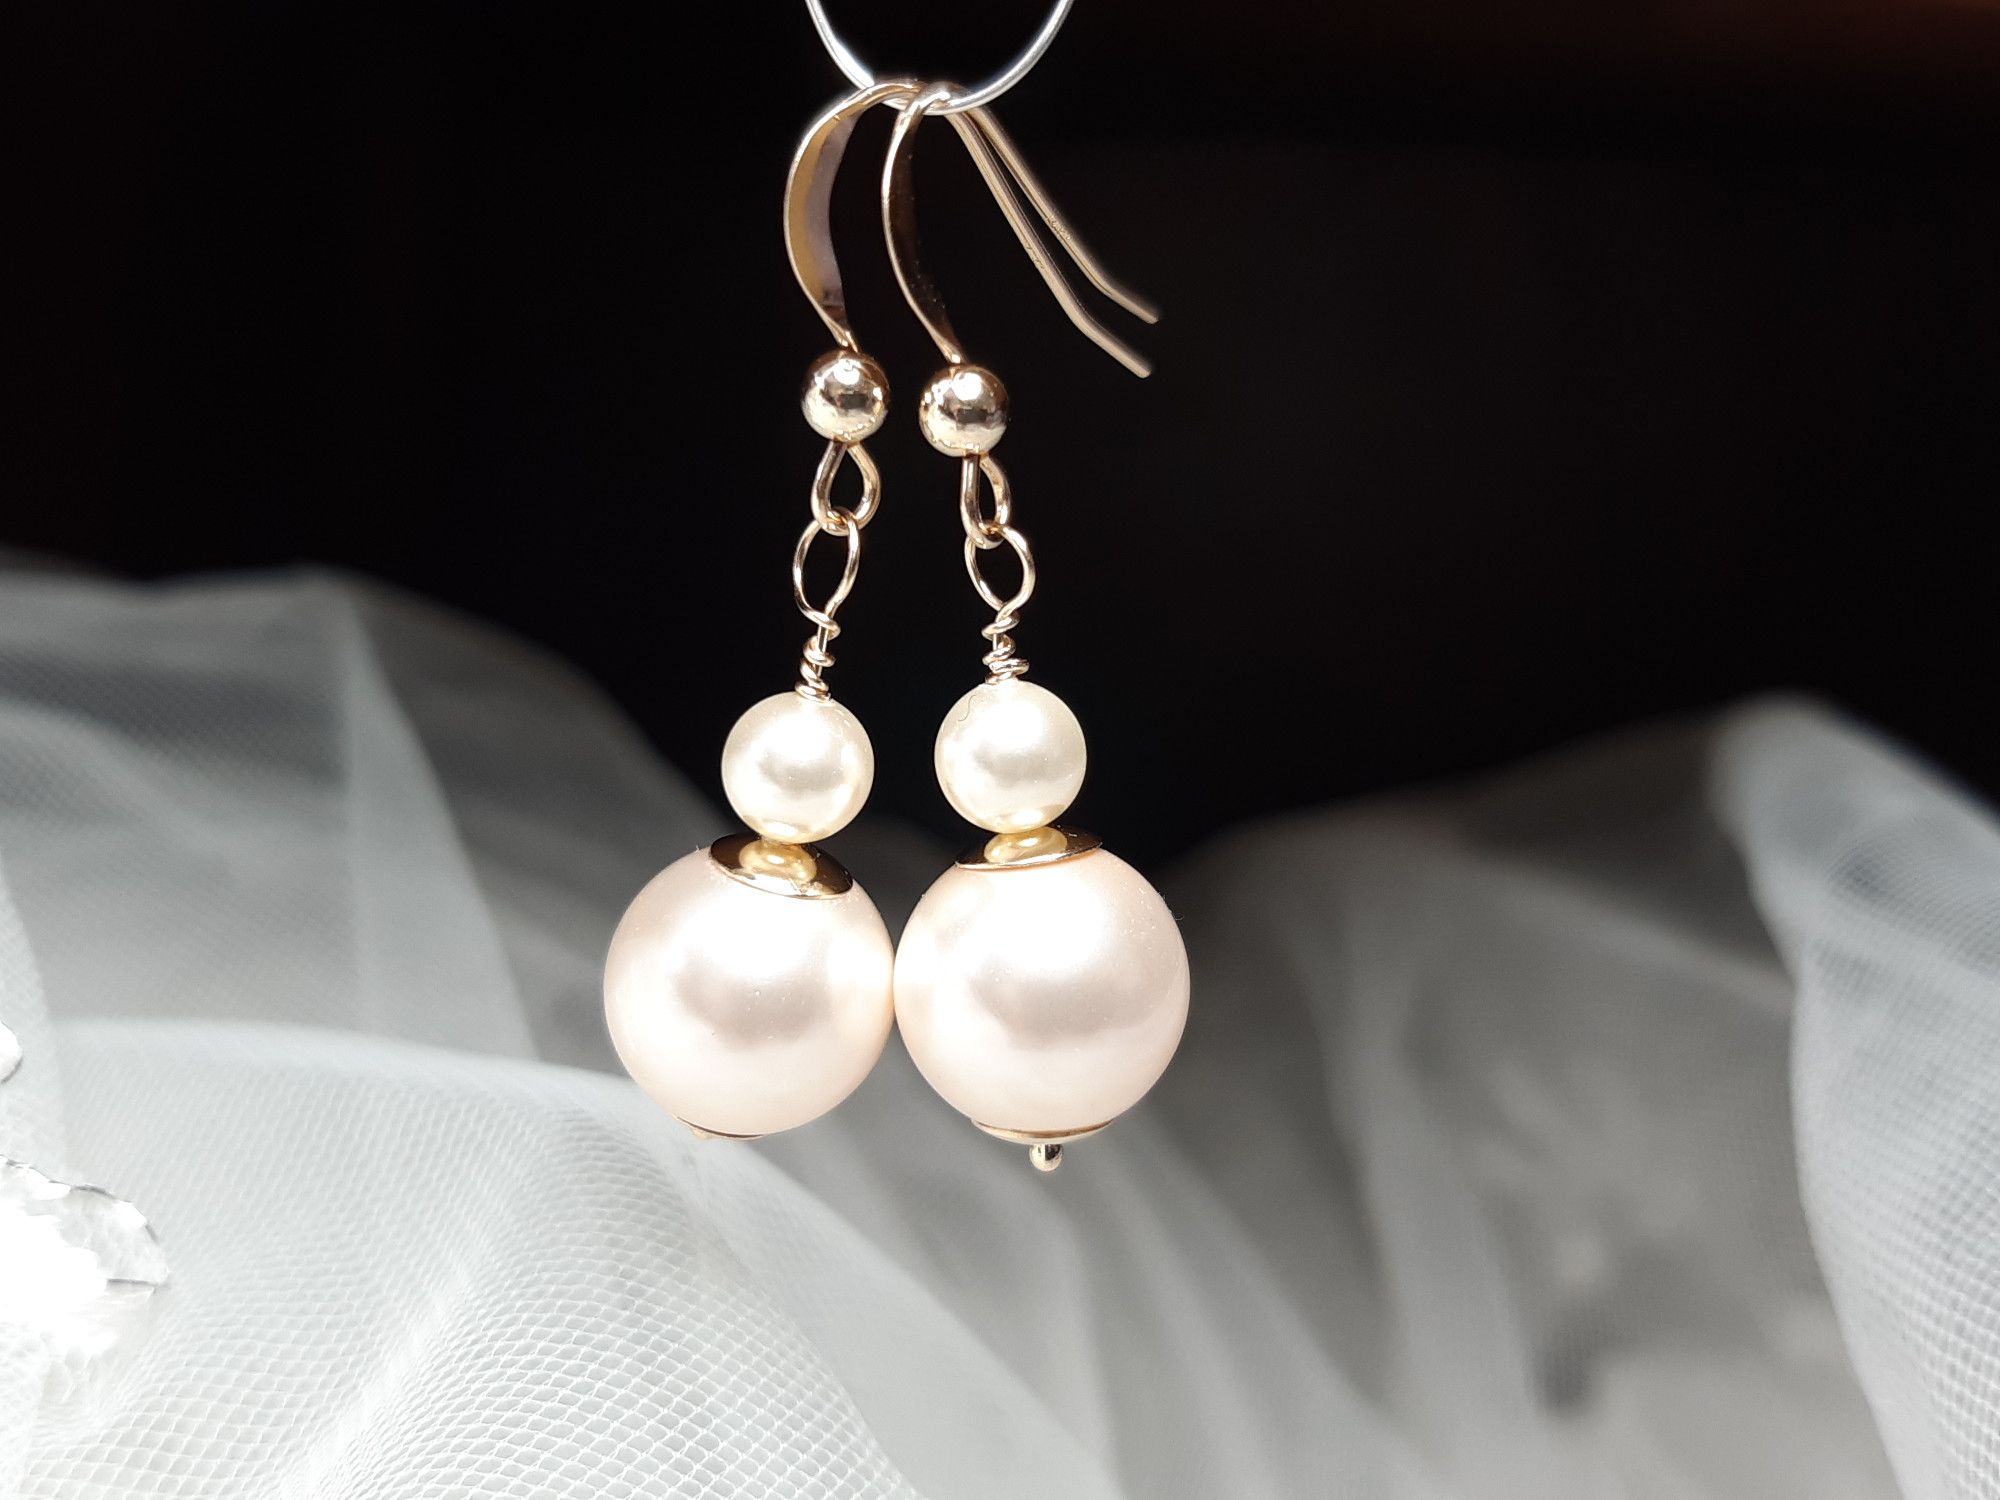 Occasion-bridal-wedding-earrings with 14K gold & pearls-2.jpg